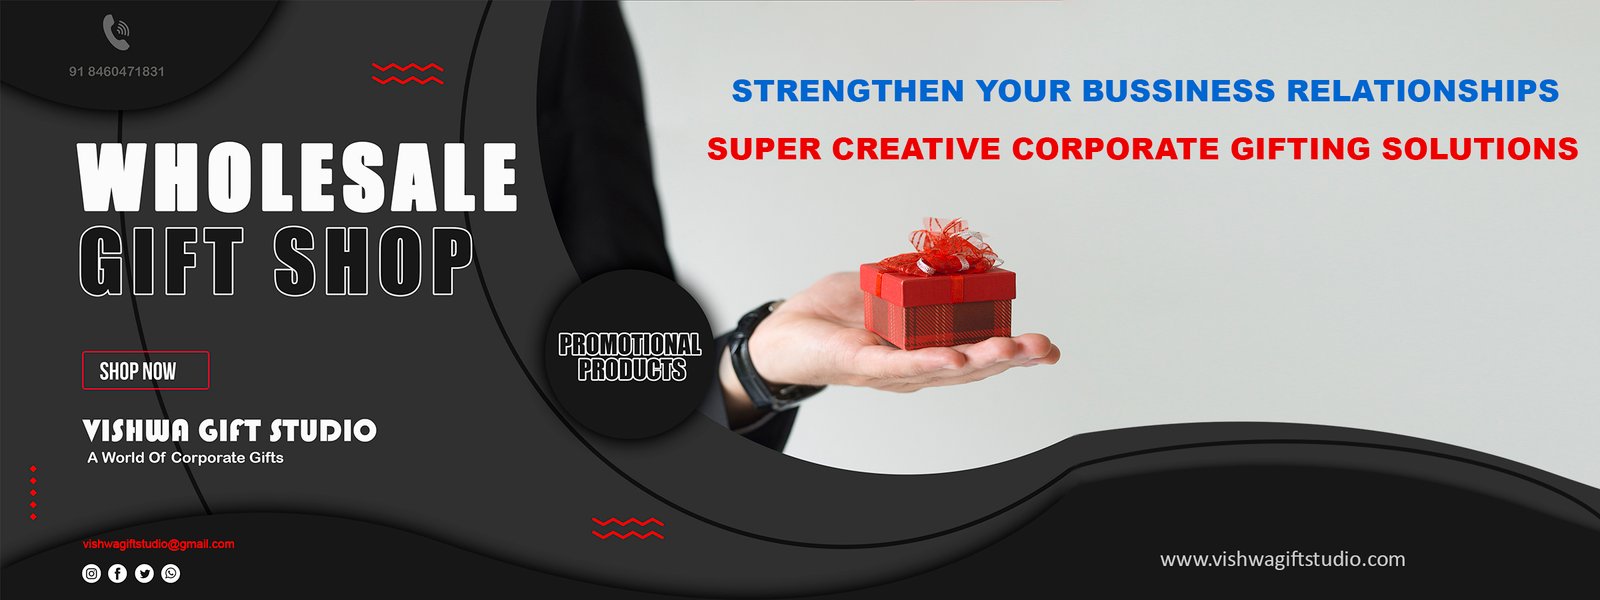 %Corporate Gifts%